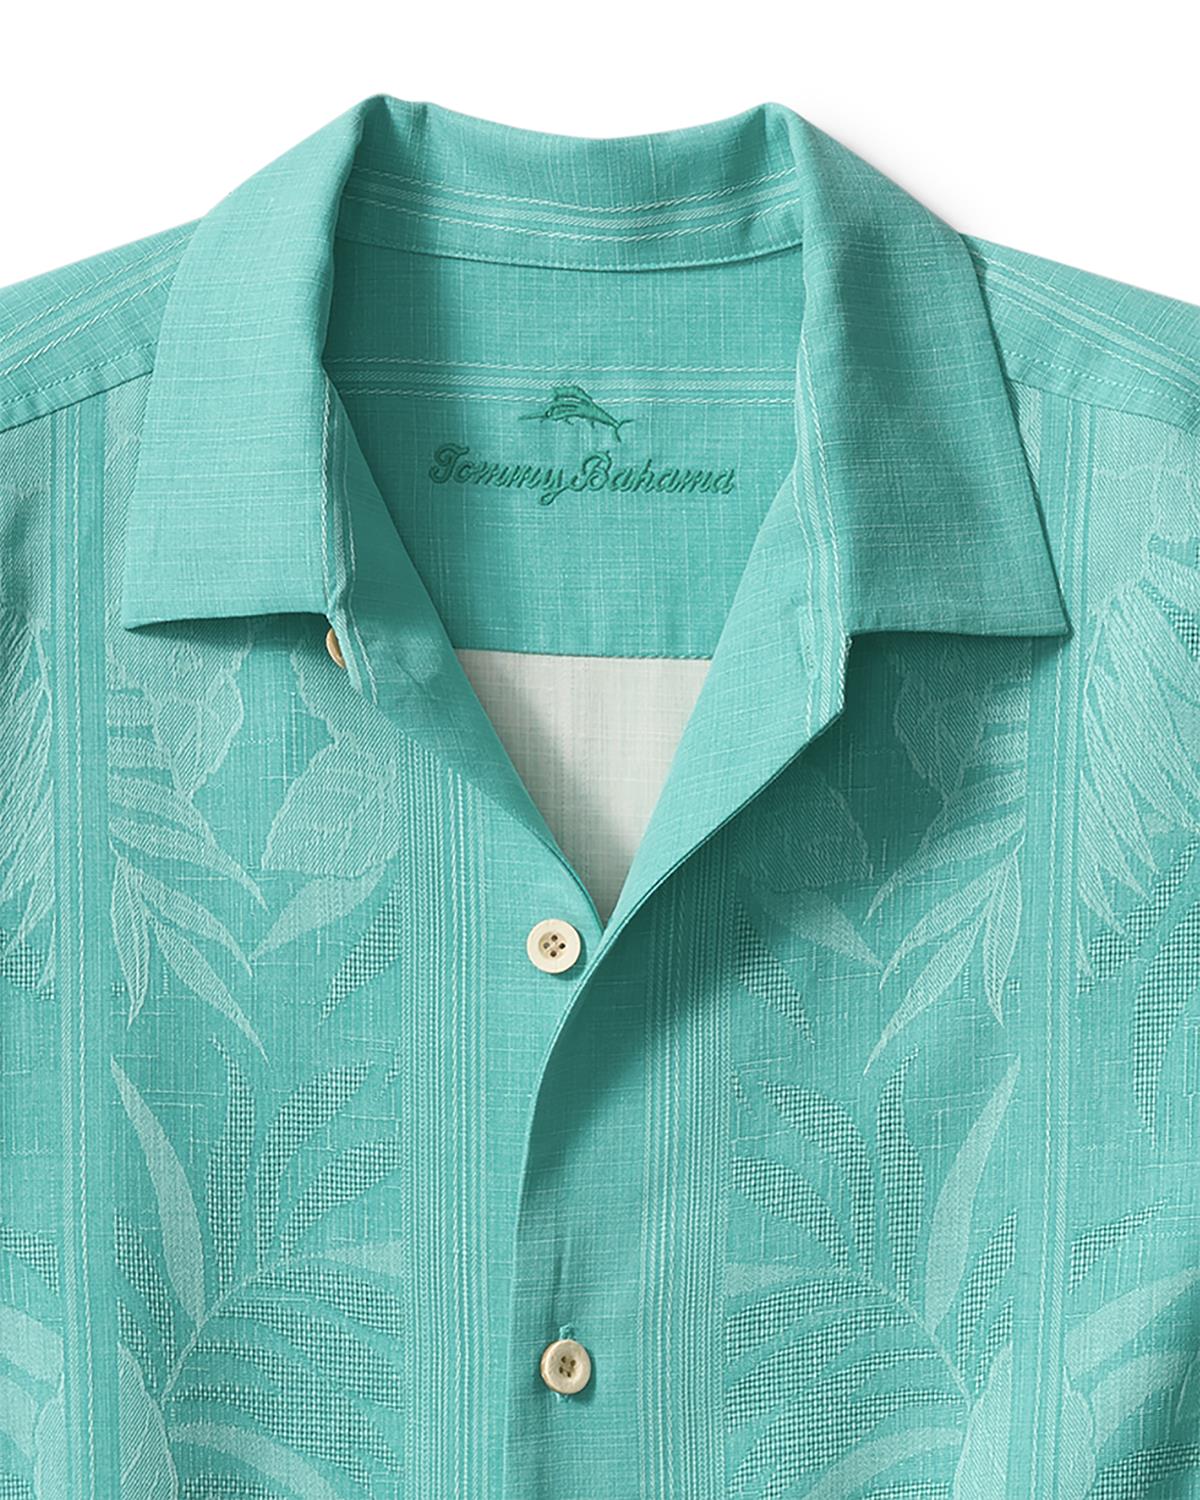 Tommy Bahama Men's White Los Angeles Dodgers Sport Tropic Isles Camp  Button-Up Shirt - Macy's